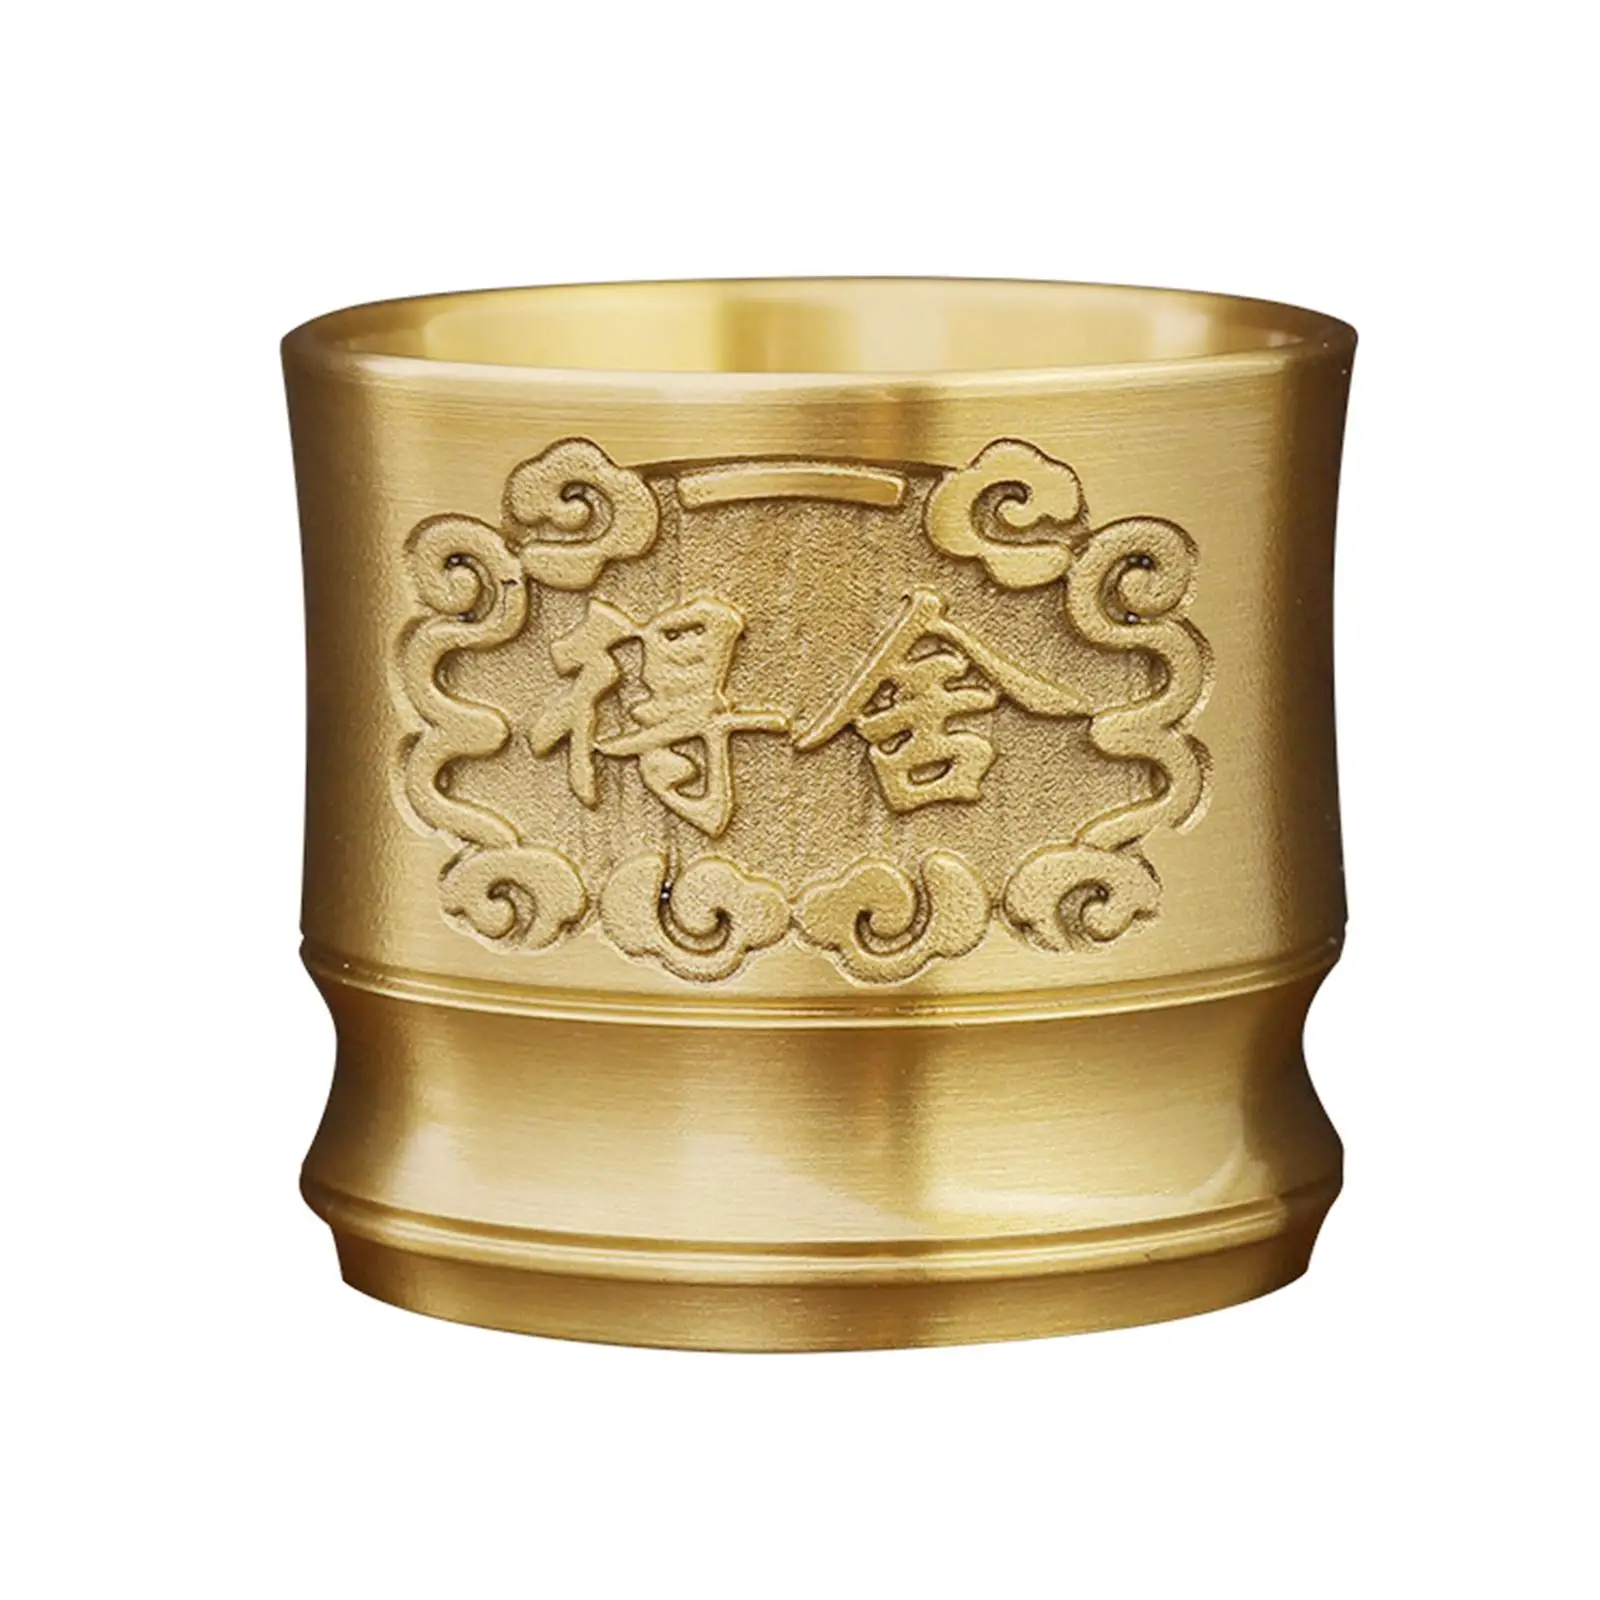 Brass Cup Collection Sculpted Drinkware Tea Mug Ornament for Table Decor